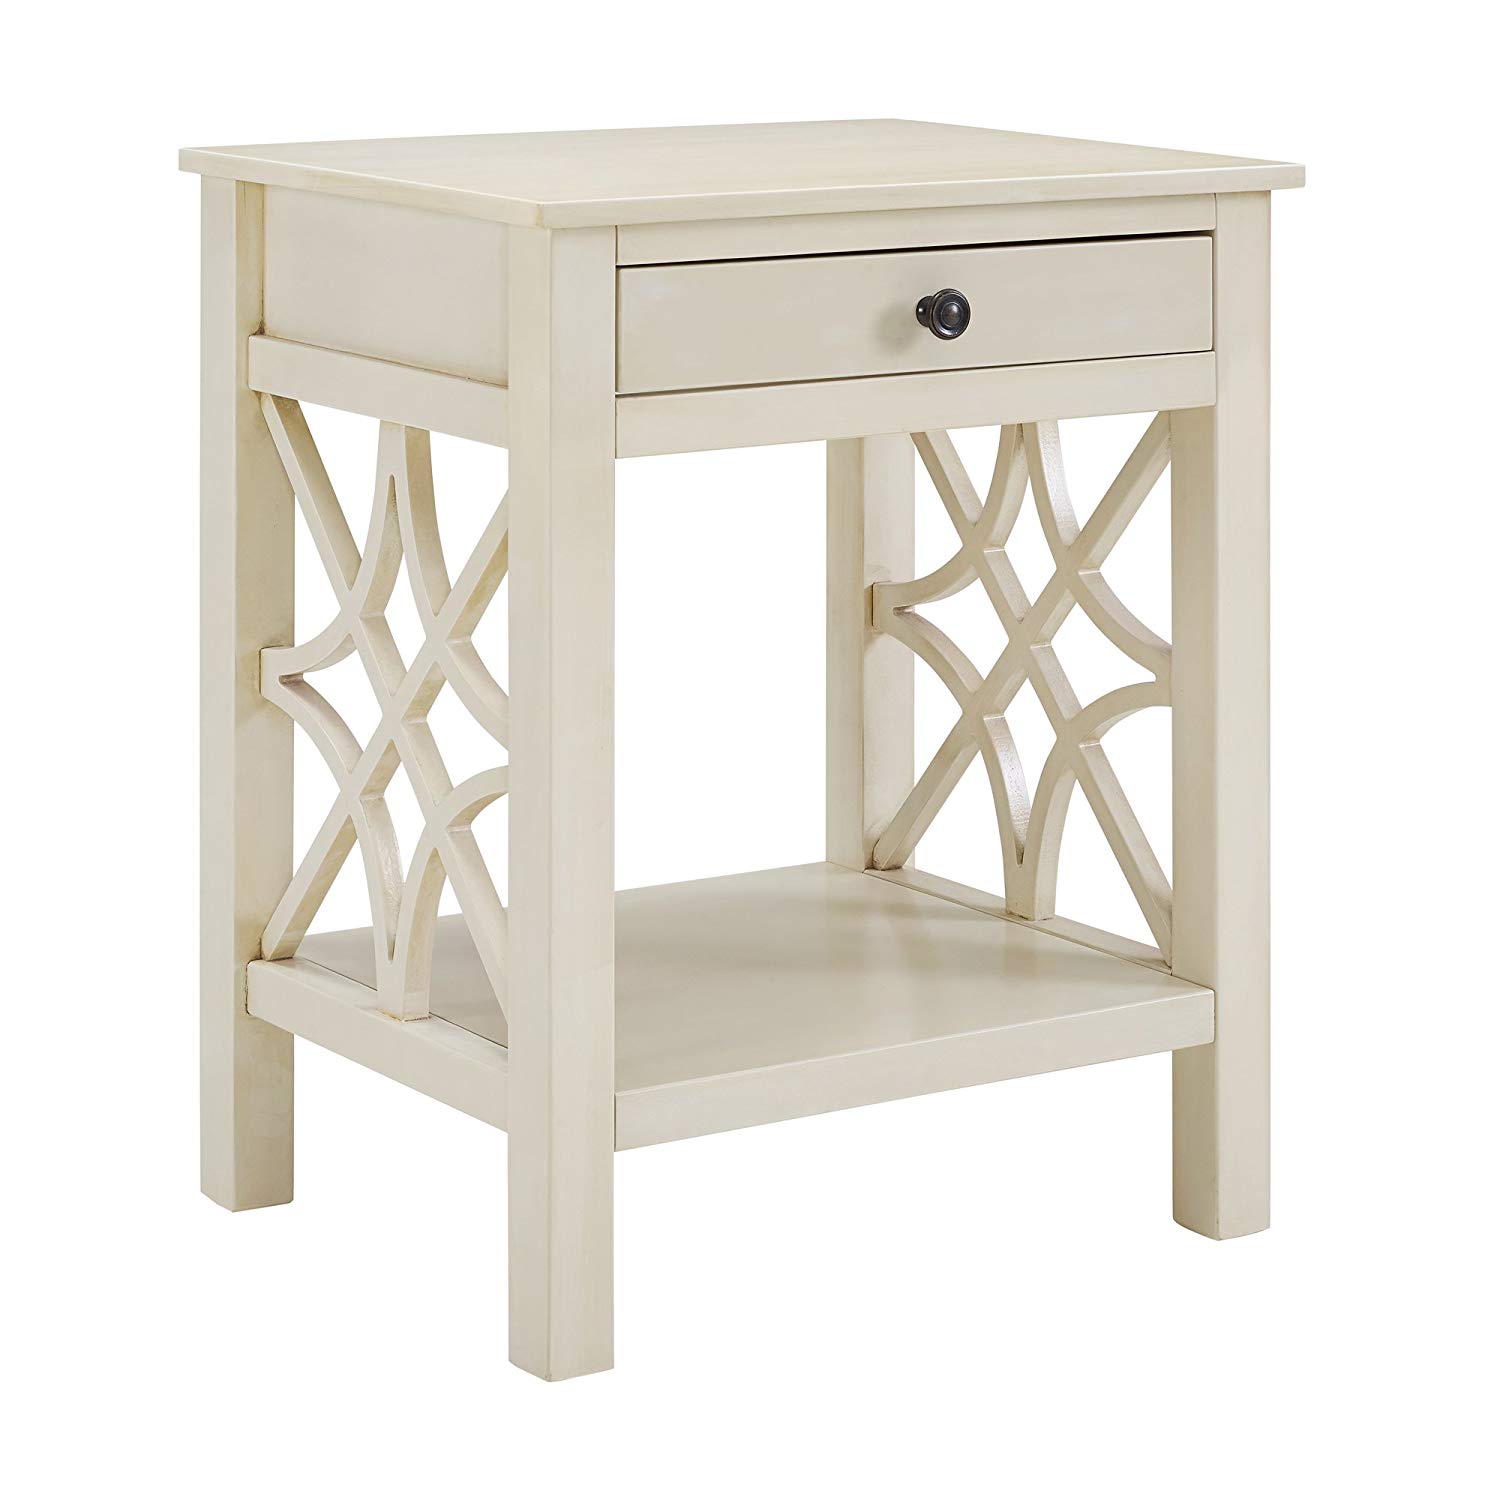 linon end table antique white kitchen dining shaker corner square coffee stools mission type furniture dog kennel decor stacking tables target wicker and ethan allen studio oak